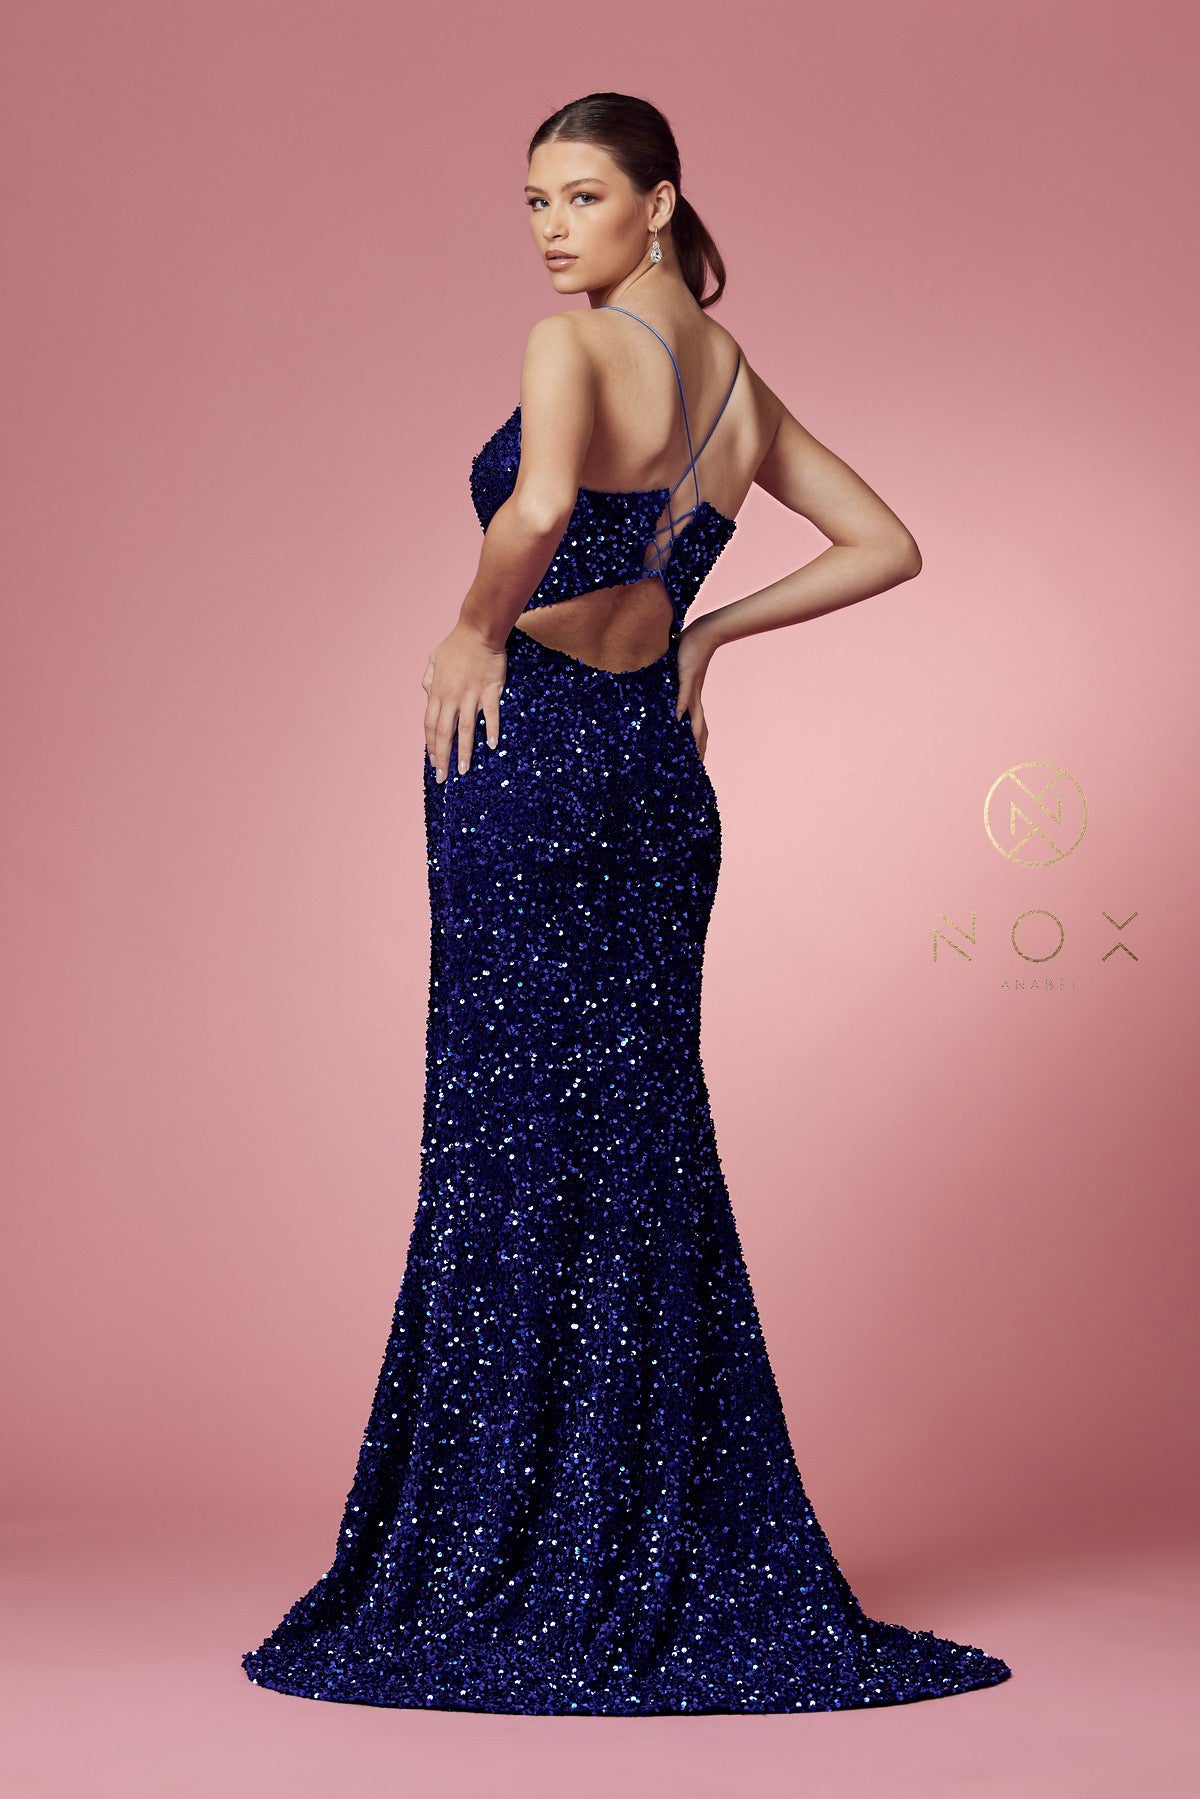 Nox Anabel R433 Long Fitted Velvet Sequin Prom Dress Formal Slit V Neck Corset  PLUNGING NECKLINE FITTED BODICE VELVET SEQUENCE TRUMPET SKIRT An absolutely glamorous piece by NOX ANABEL is for a classy lady who is all about the details. This relaxed fit-and-flare silhouette features a soft sweetheart plunge neckline and spaghetti straps for an elegant and universally flattering shape—Shinny silhouette with sequins incorporated throughout the sheer bodice for a hint of shimmer.